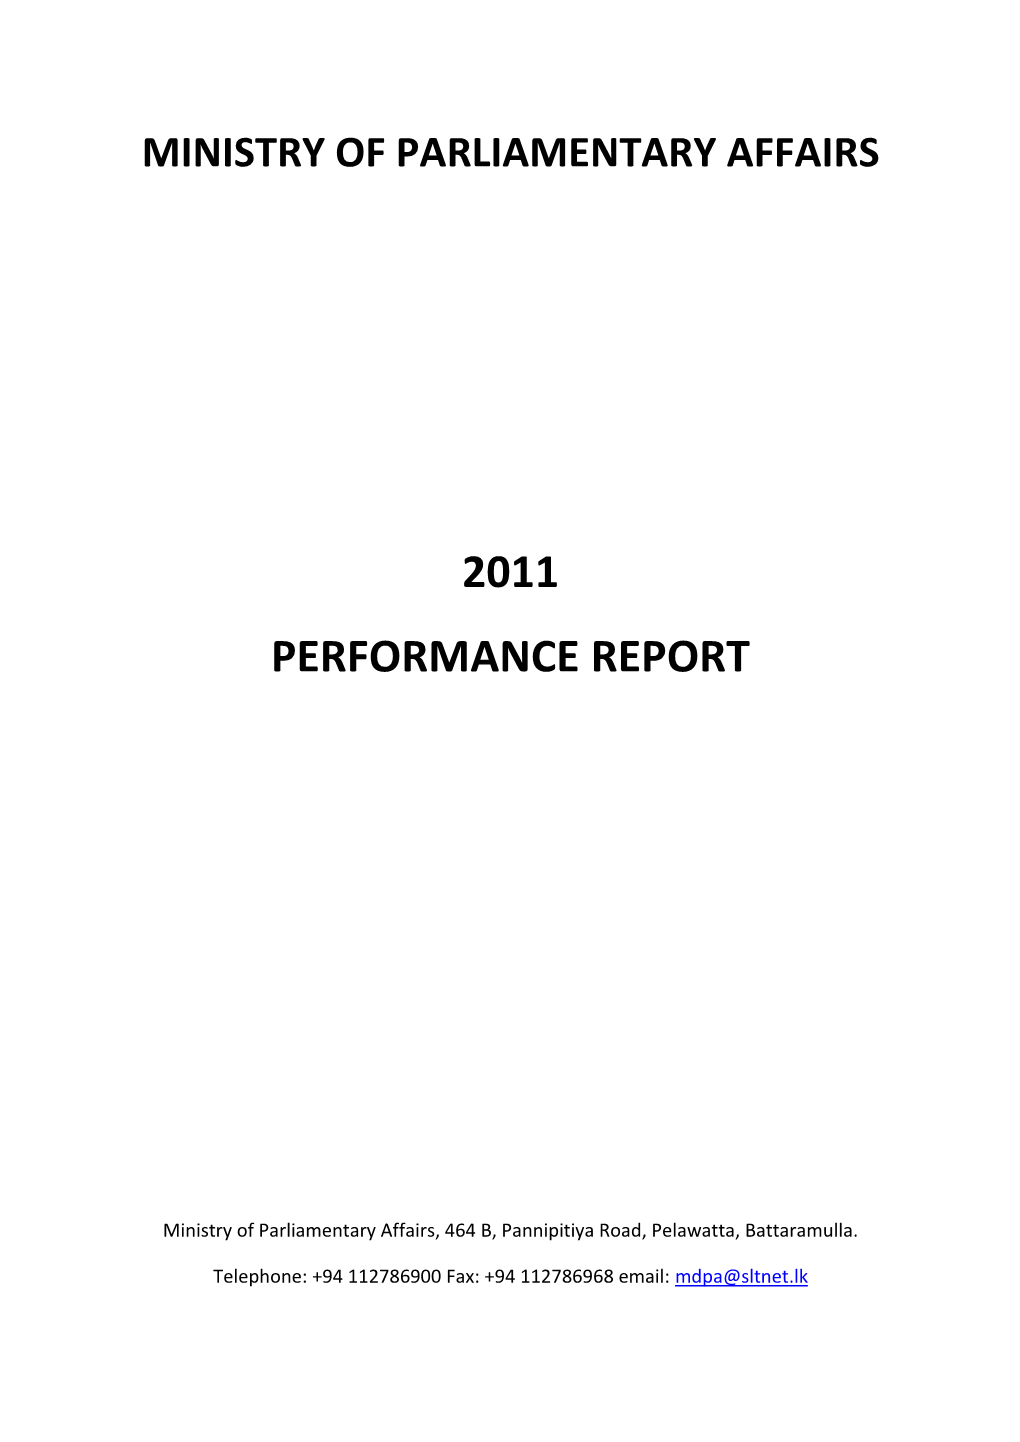 Ministry of Parliamentary Affairs 2011 Performance Report